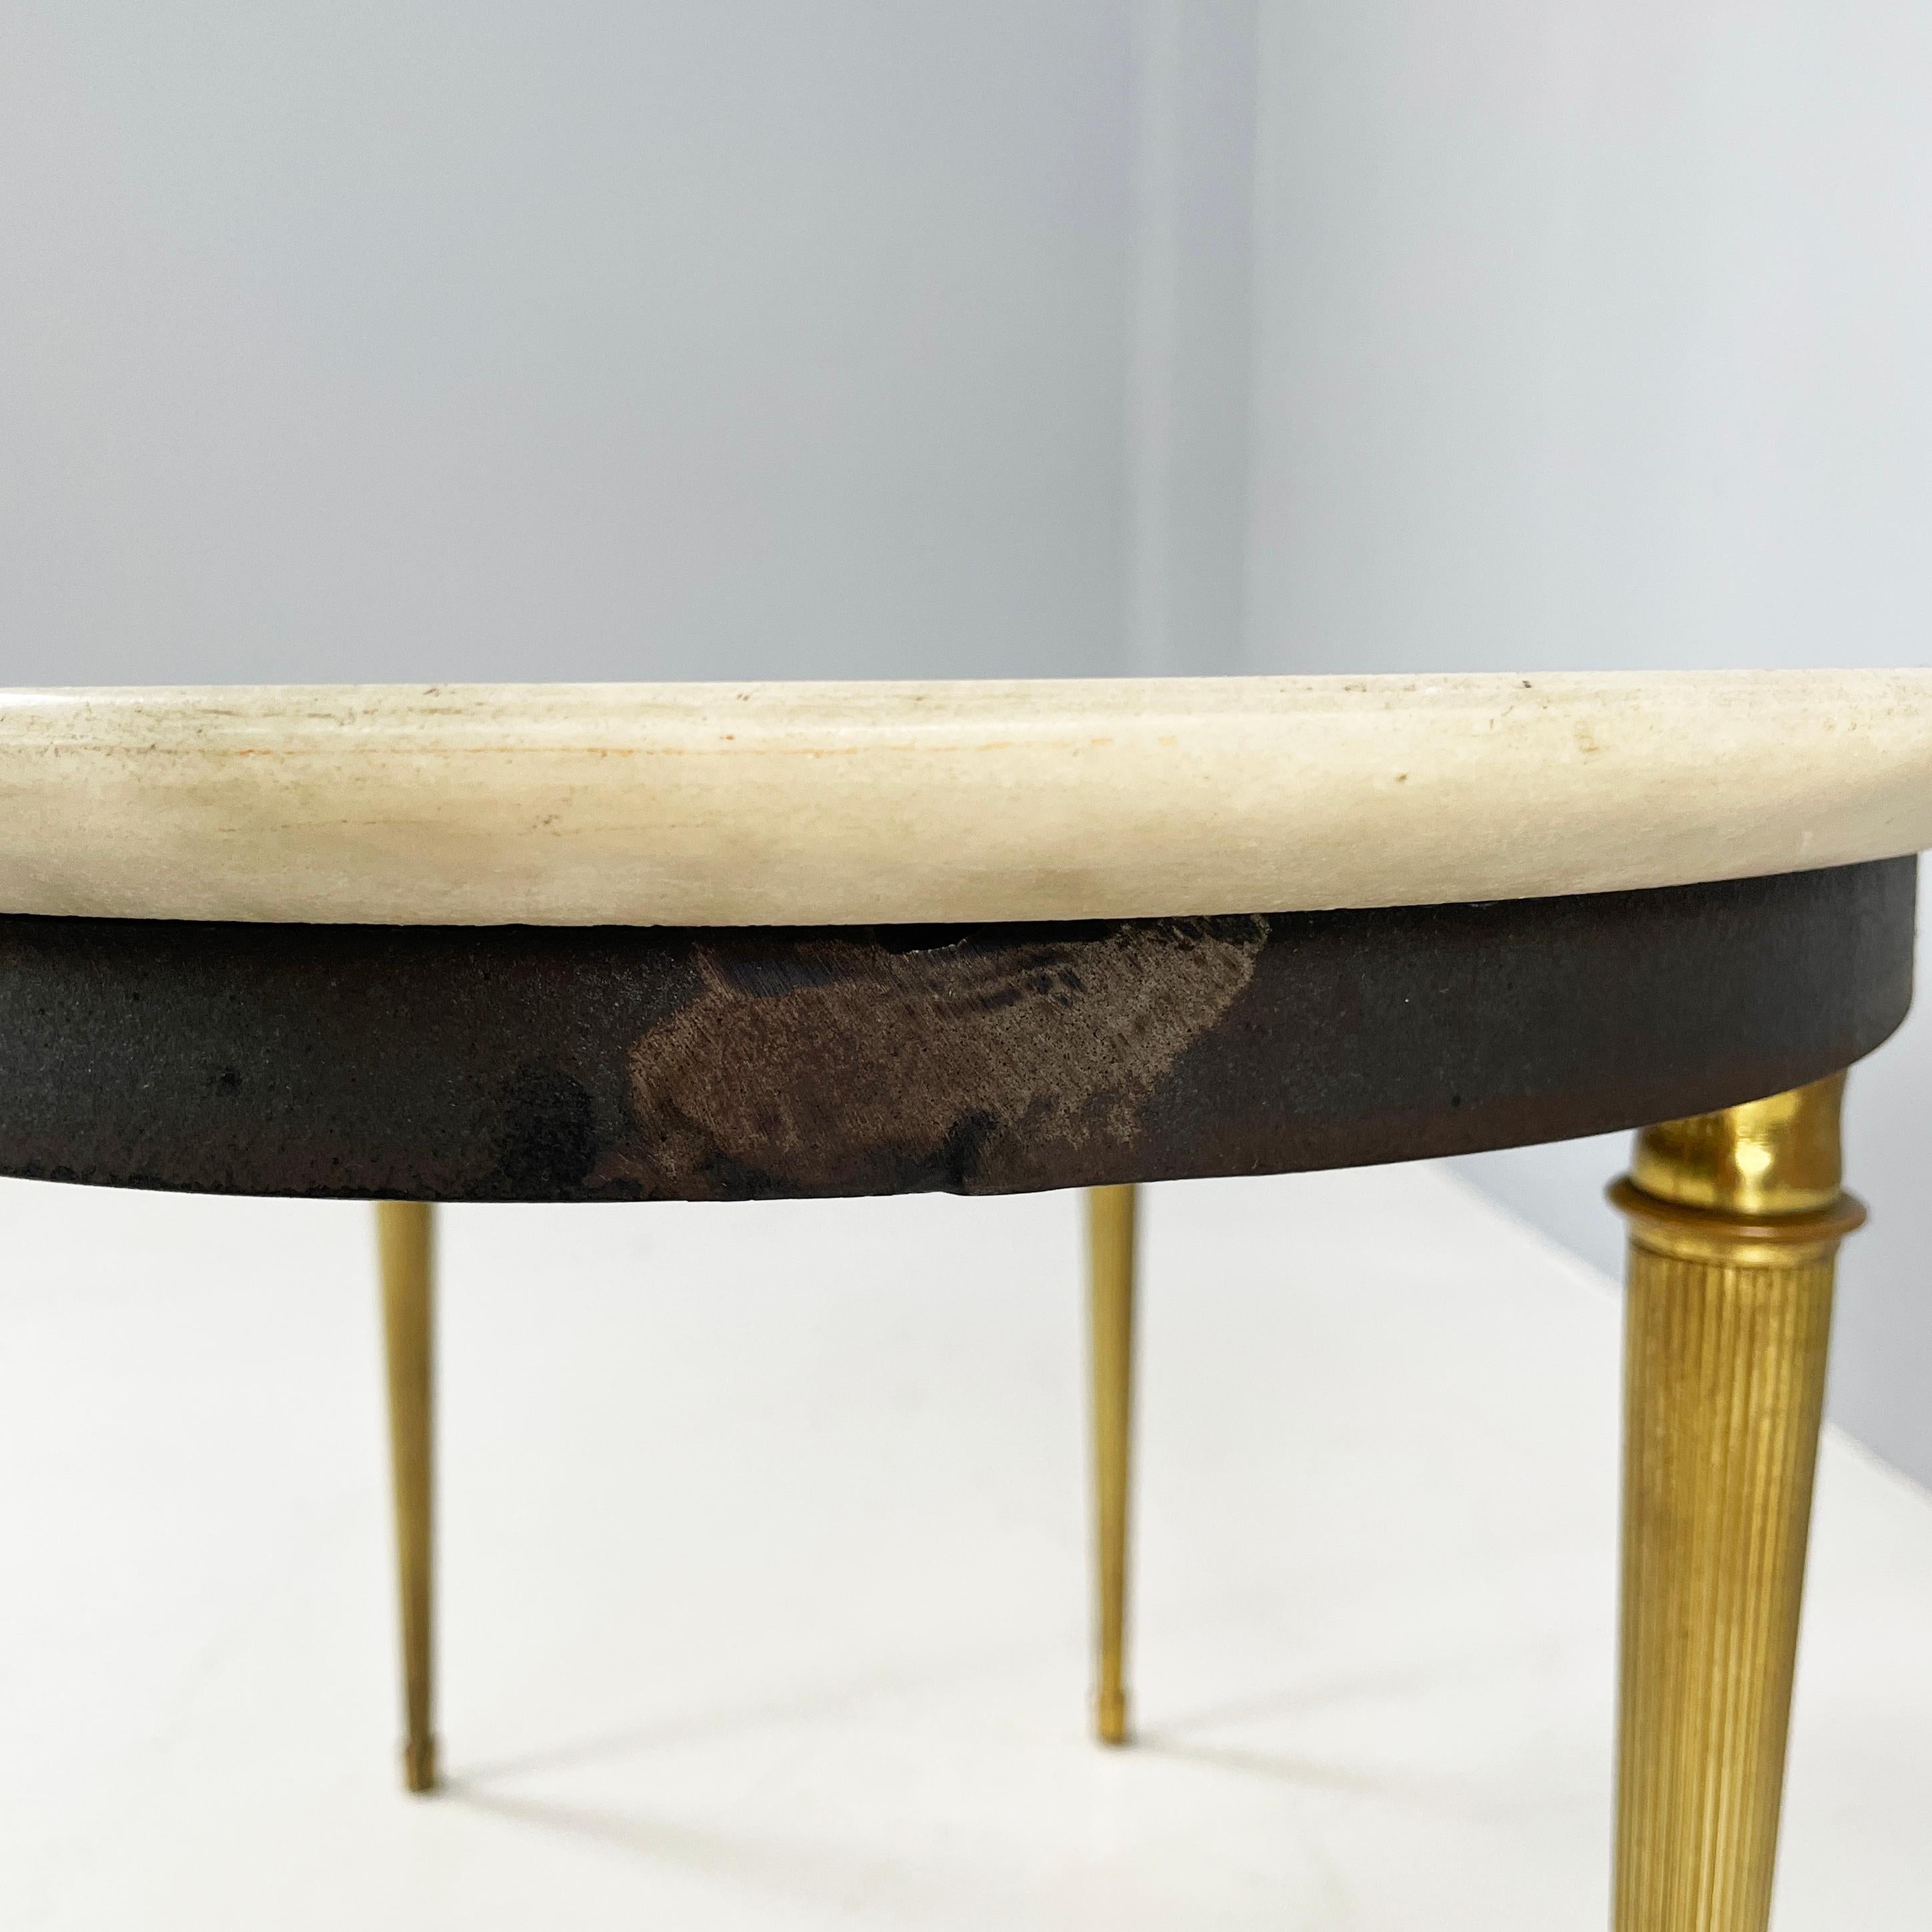 Italian mid-century modern Oval coffee table in light marble and brass, 1950s For Sale 6